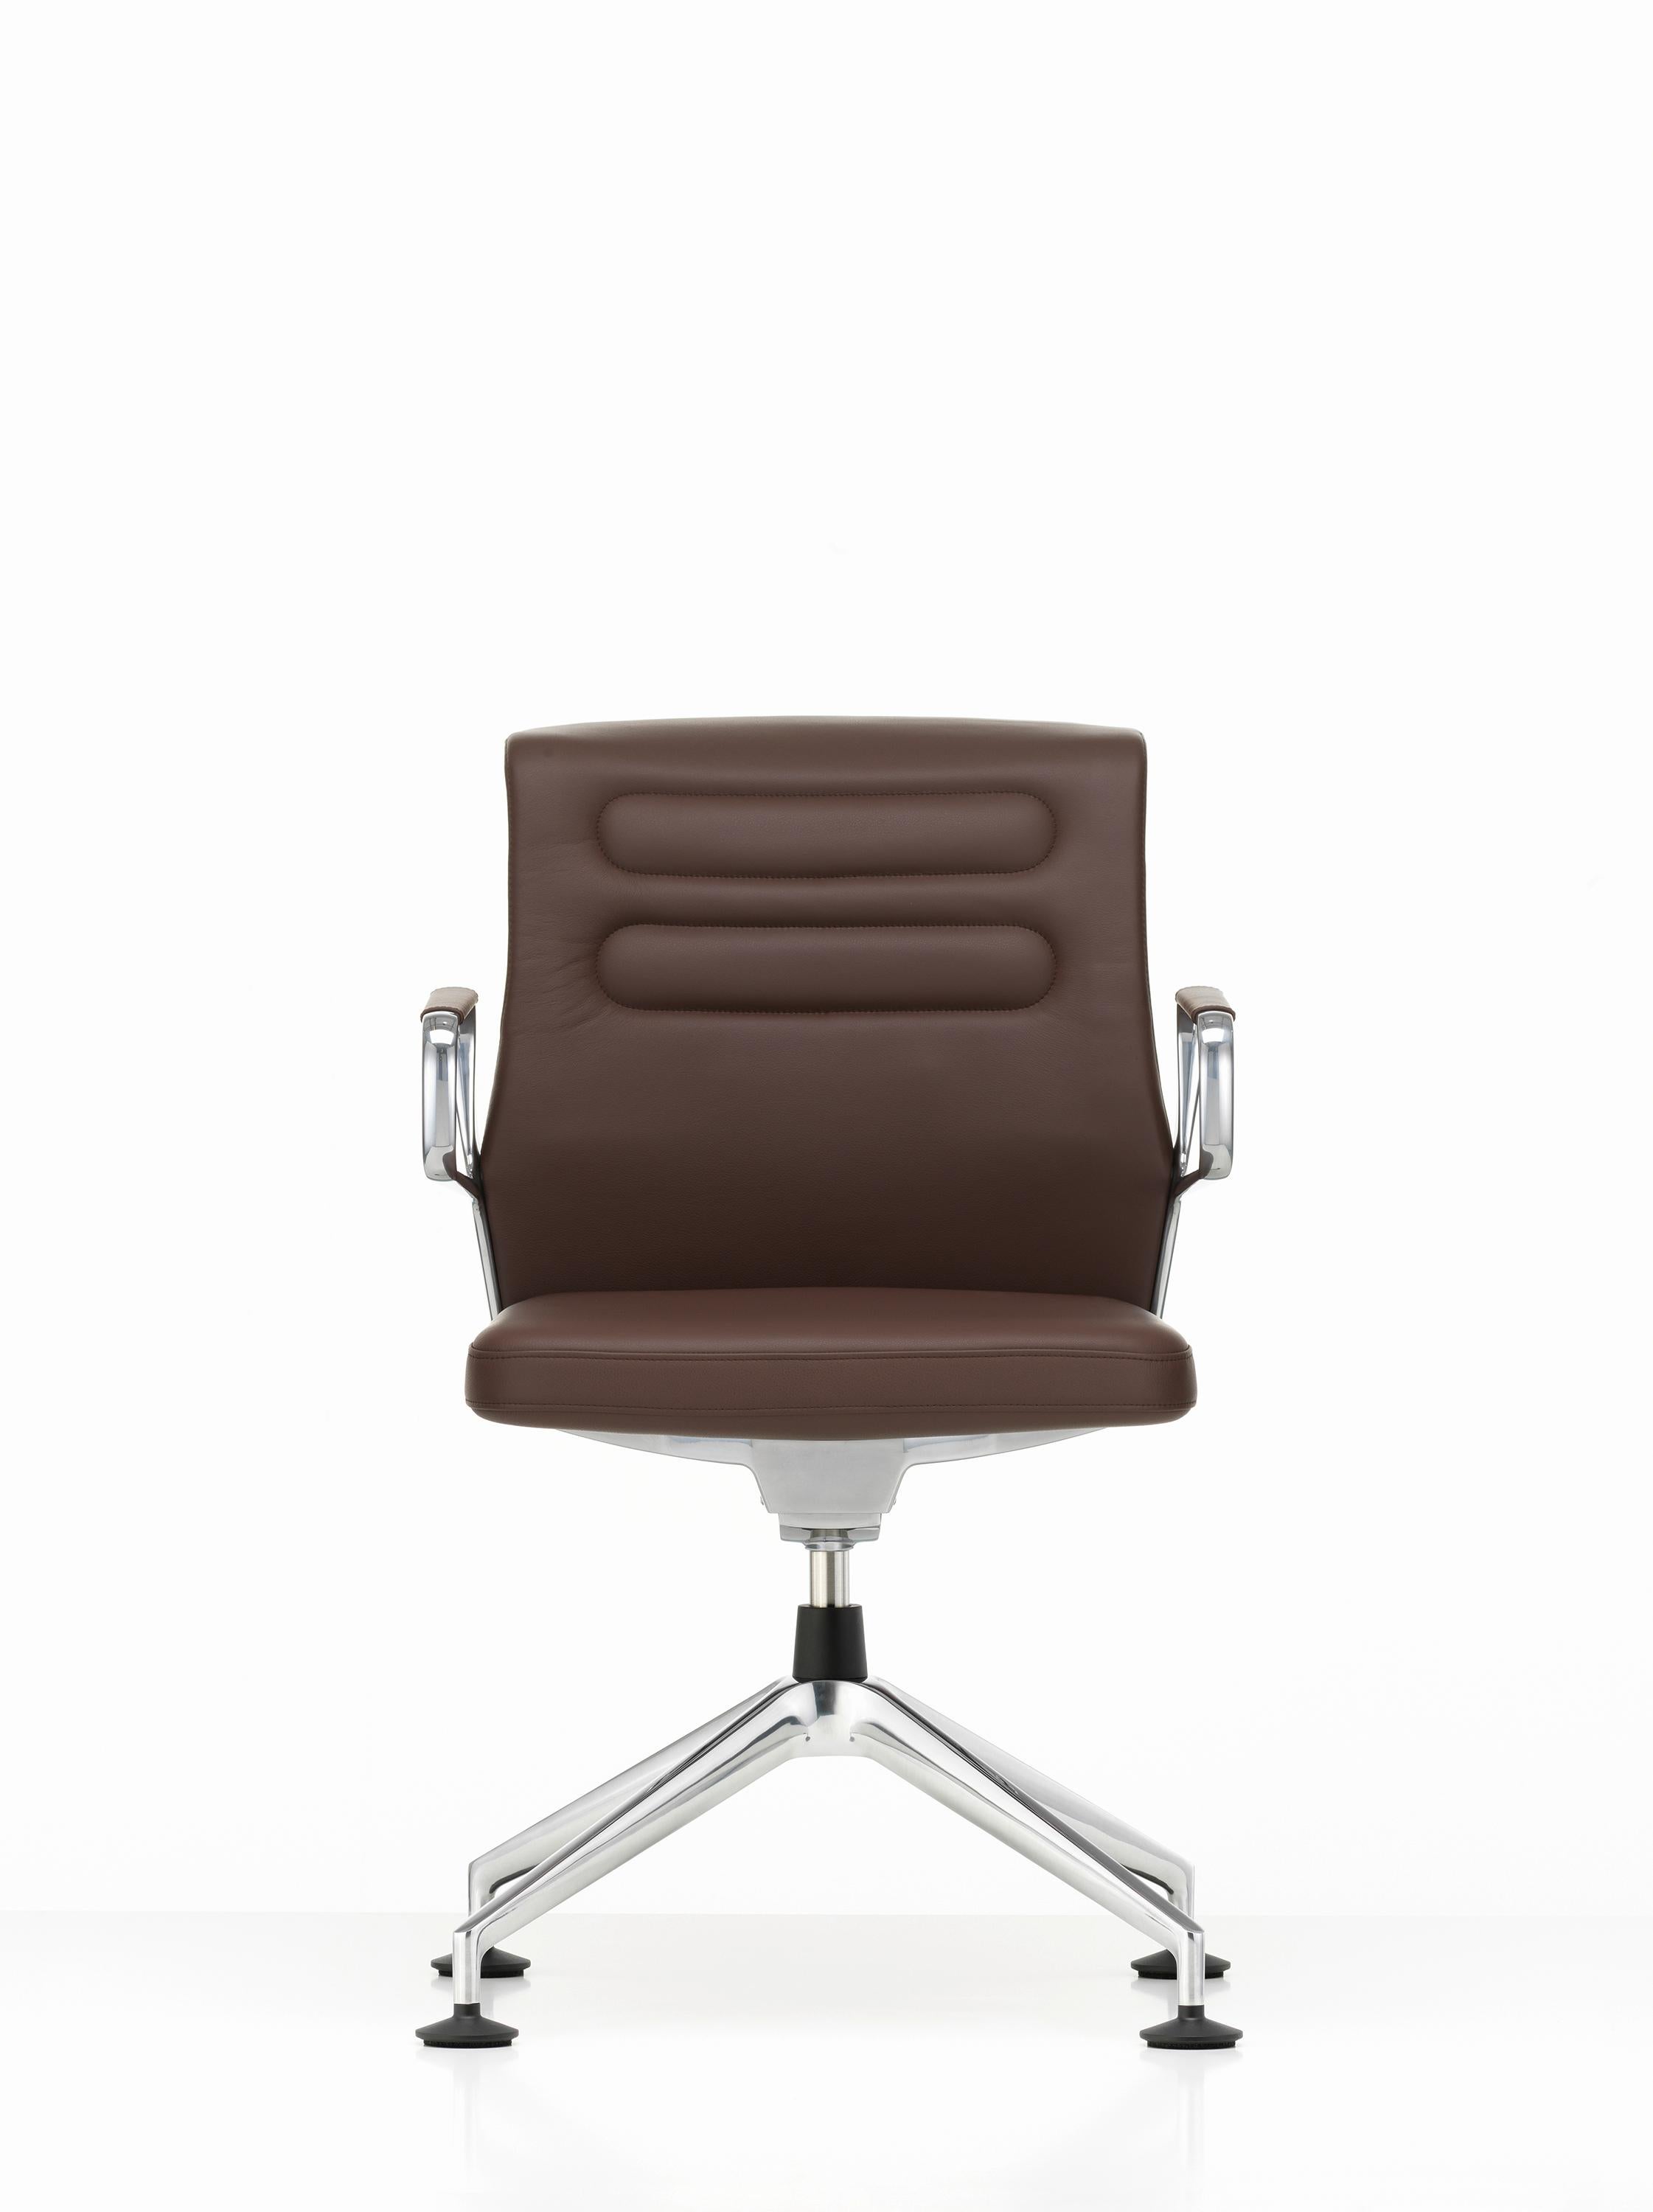 These items are currently only available in the United States.

AC 5 Meet is the Classic conference chair in the AC 5 Group office chair family. Thanks to an understated elegant design and use of high-quality materials, it cuts a fine figure in both